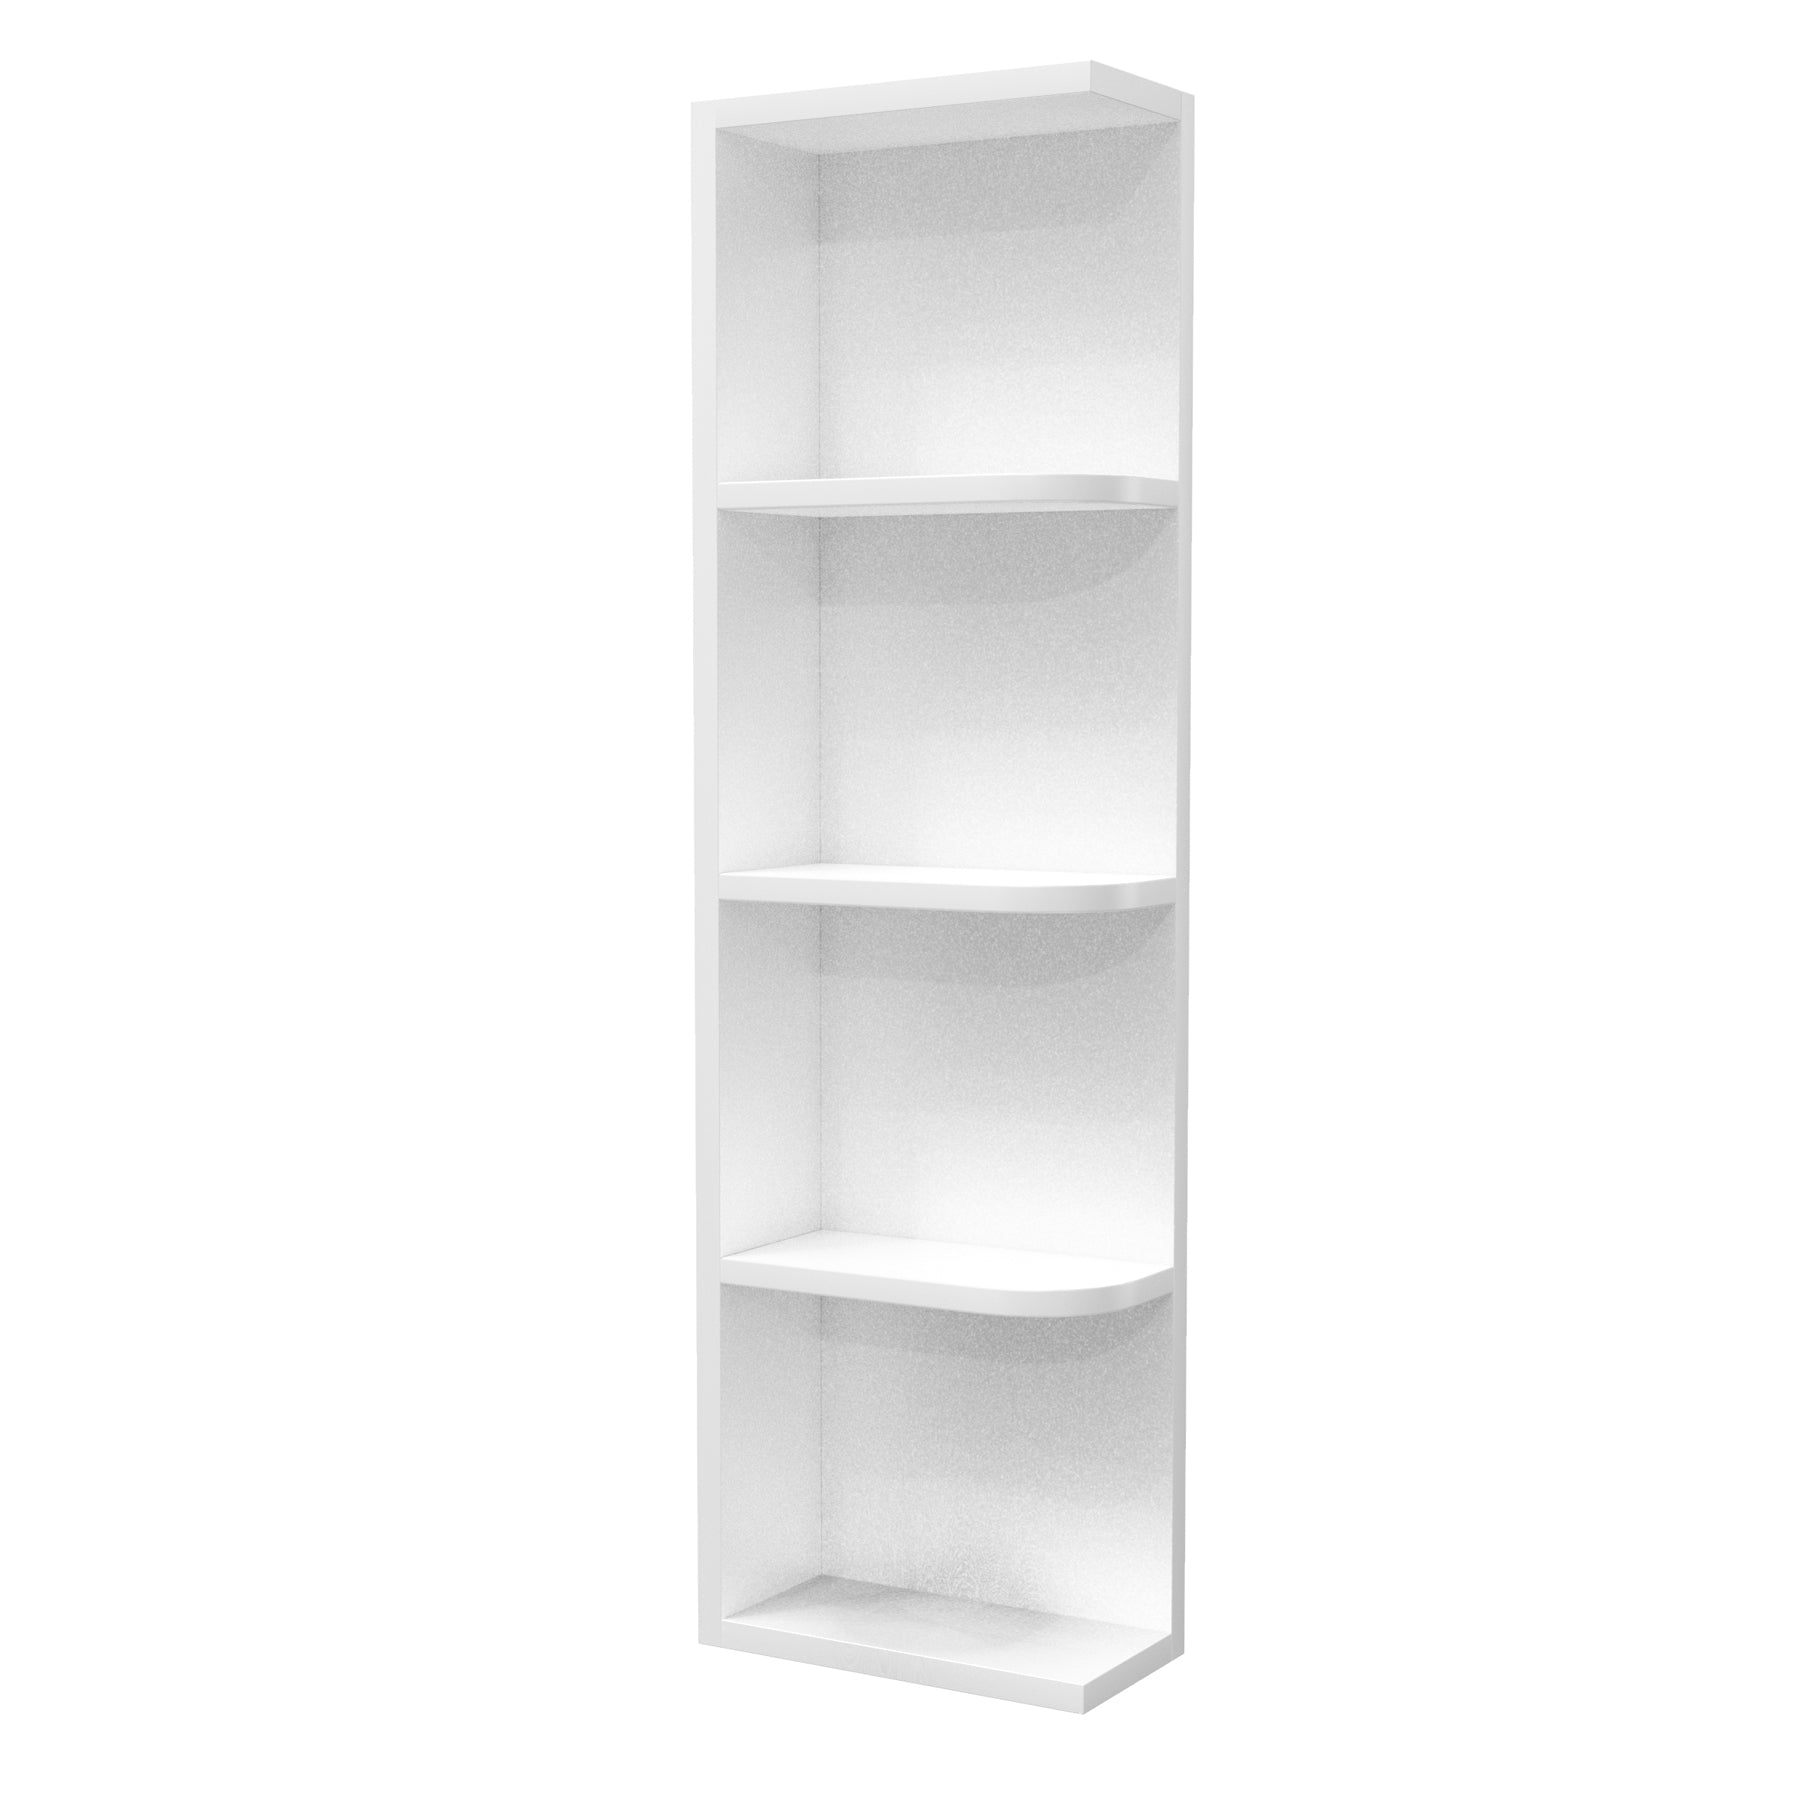 Knick Knack Wall Cabinet | Milano White | 6W x 42H x 12D